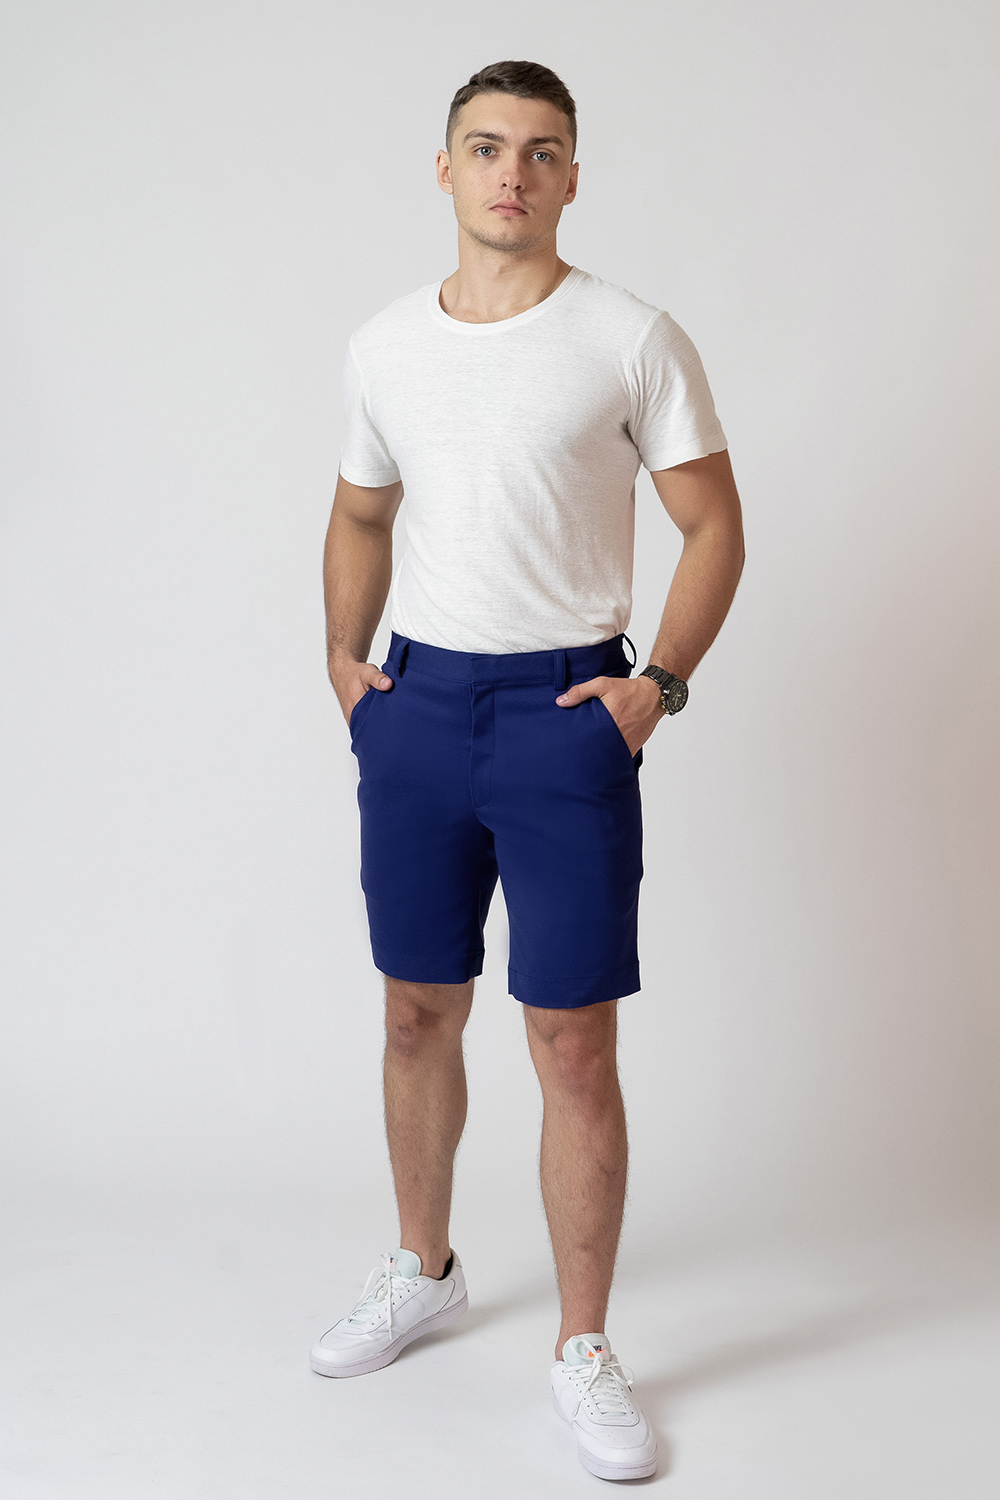 All Day Shorts - All Day Chino Shorts - Rhapsody Culture Shorts